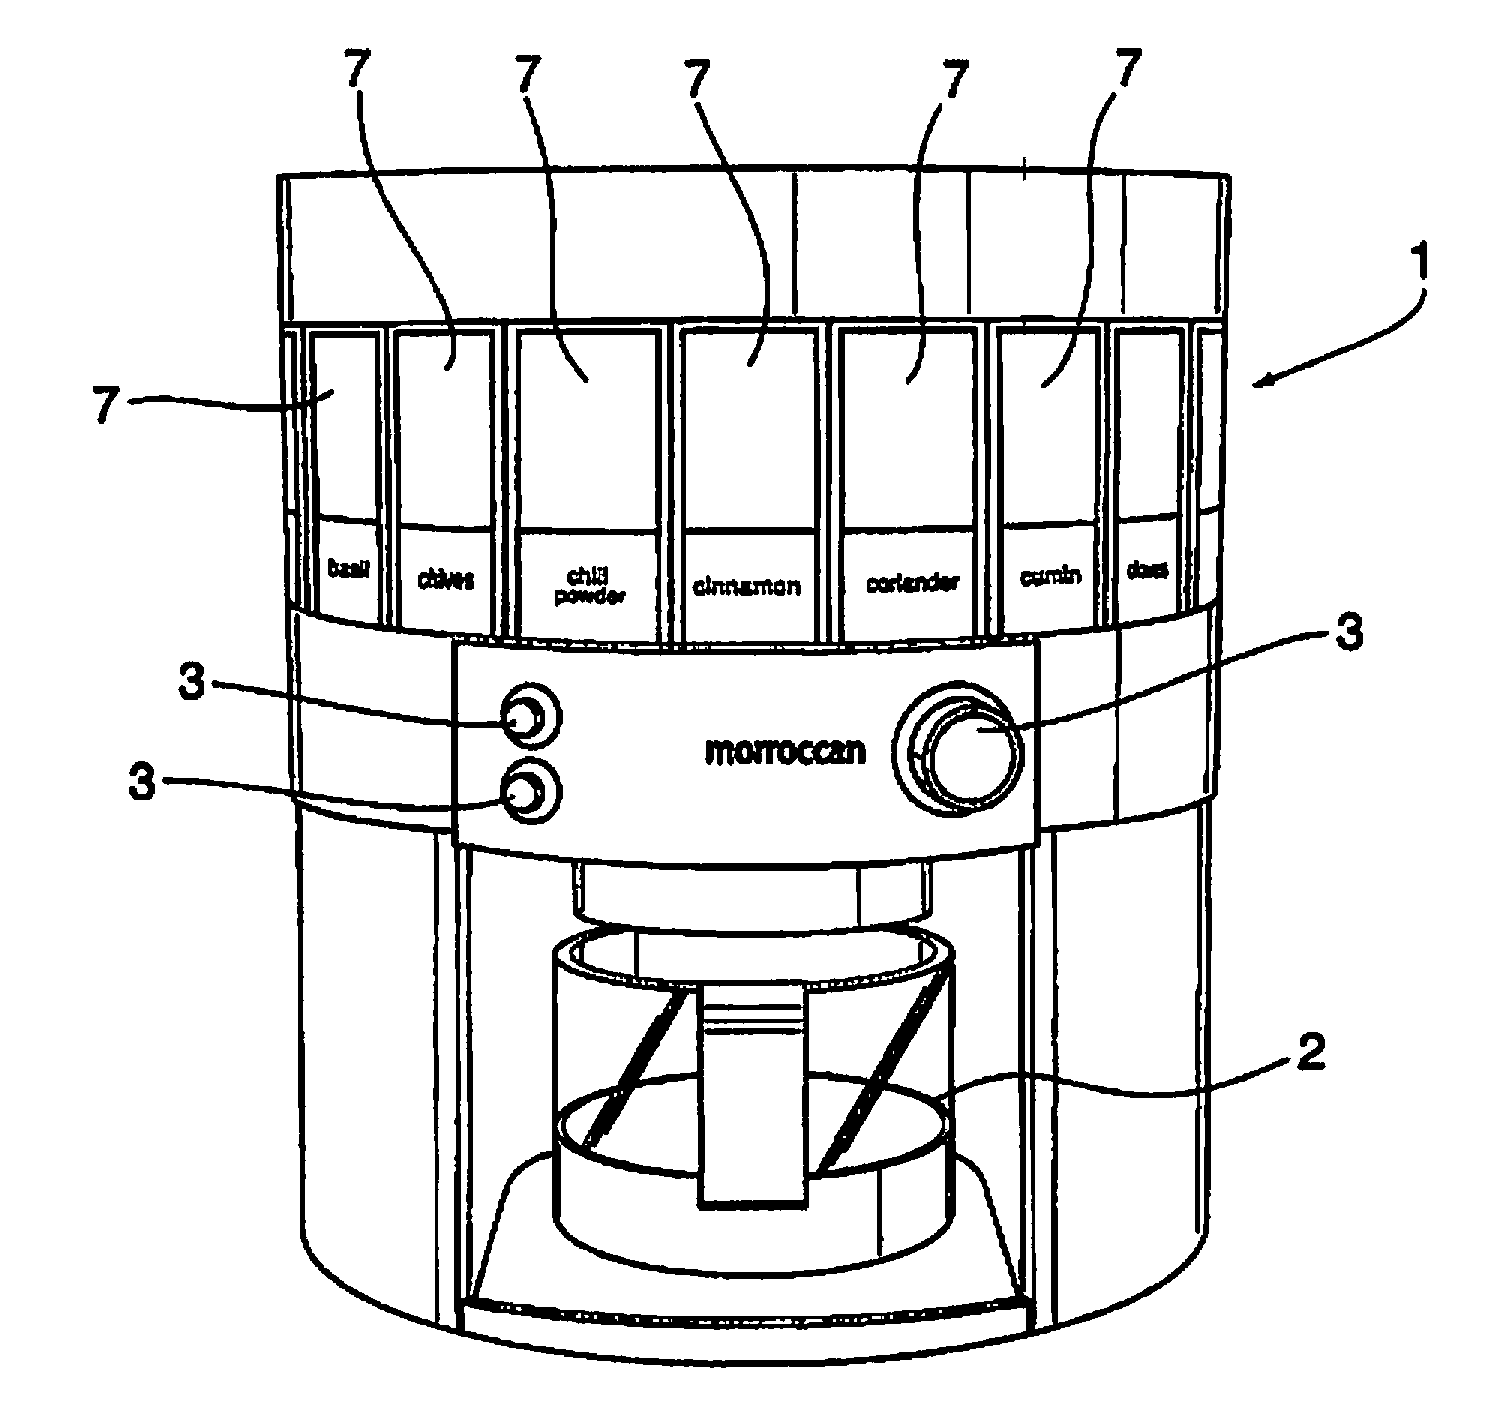 Automated dispenser and method for dispensing